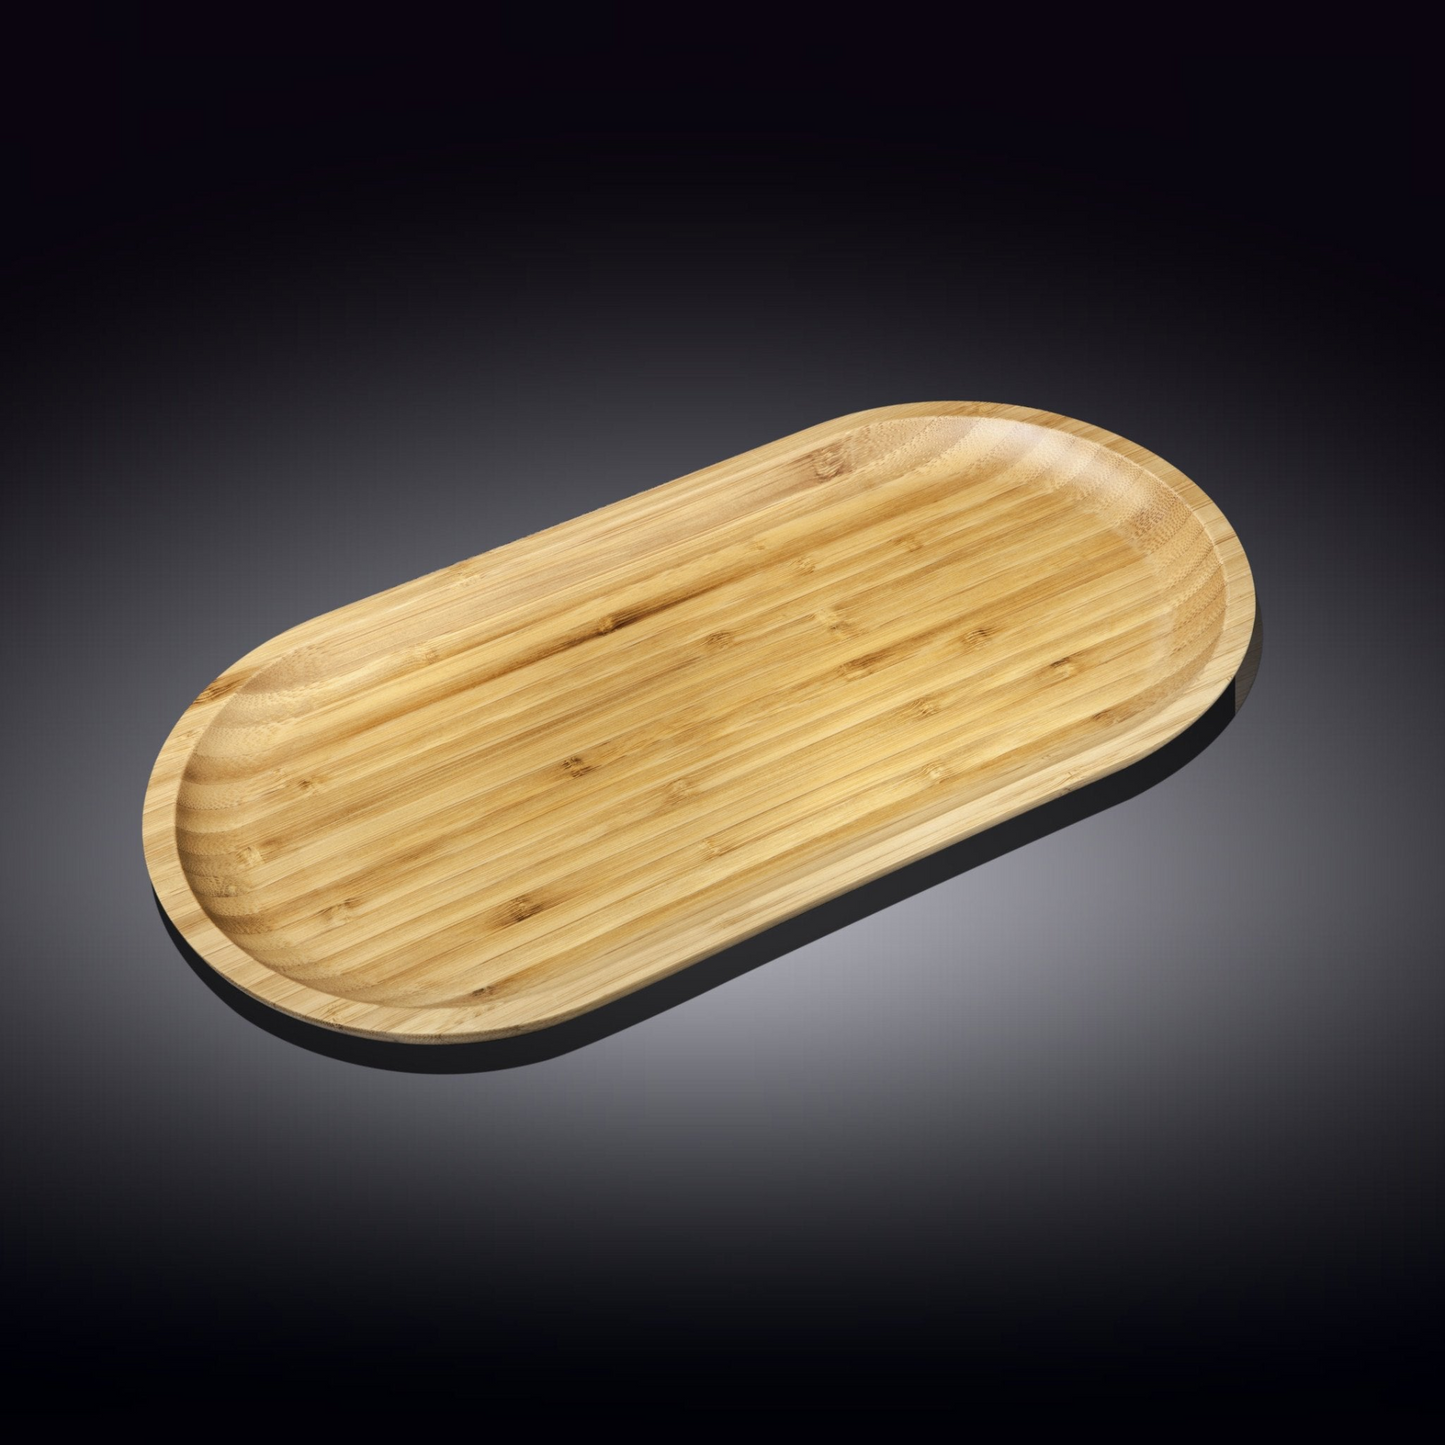 Wilmax Bamboo Wood Dish 8" X 4" | For Appetizers / Barbecue / Burger Sliders    WL-771057/A